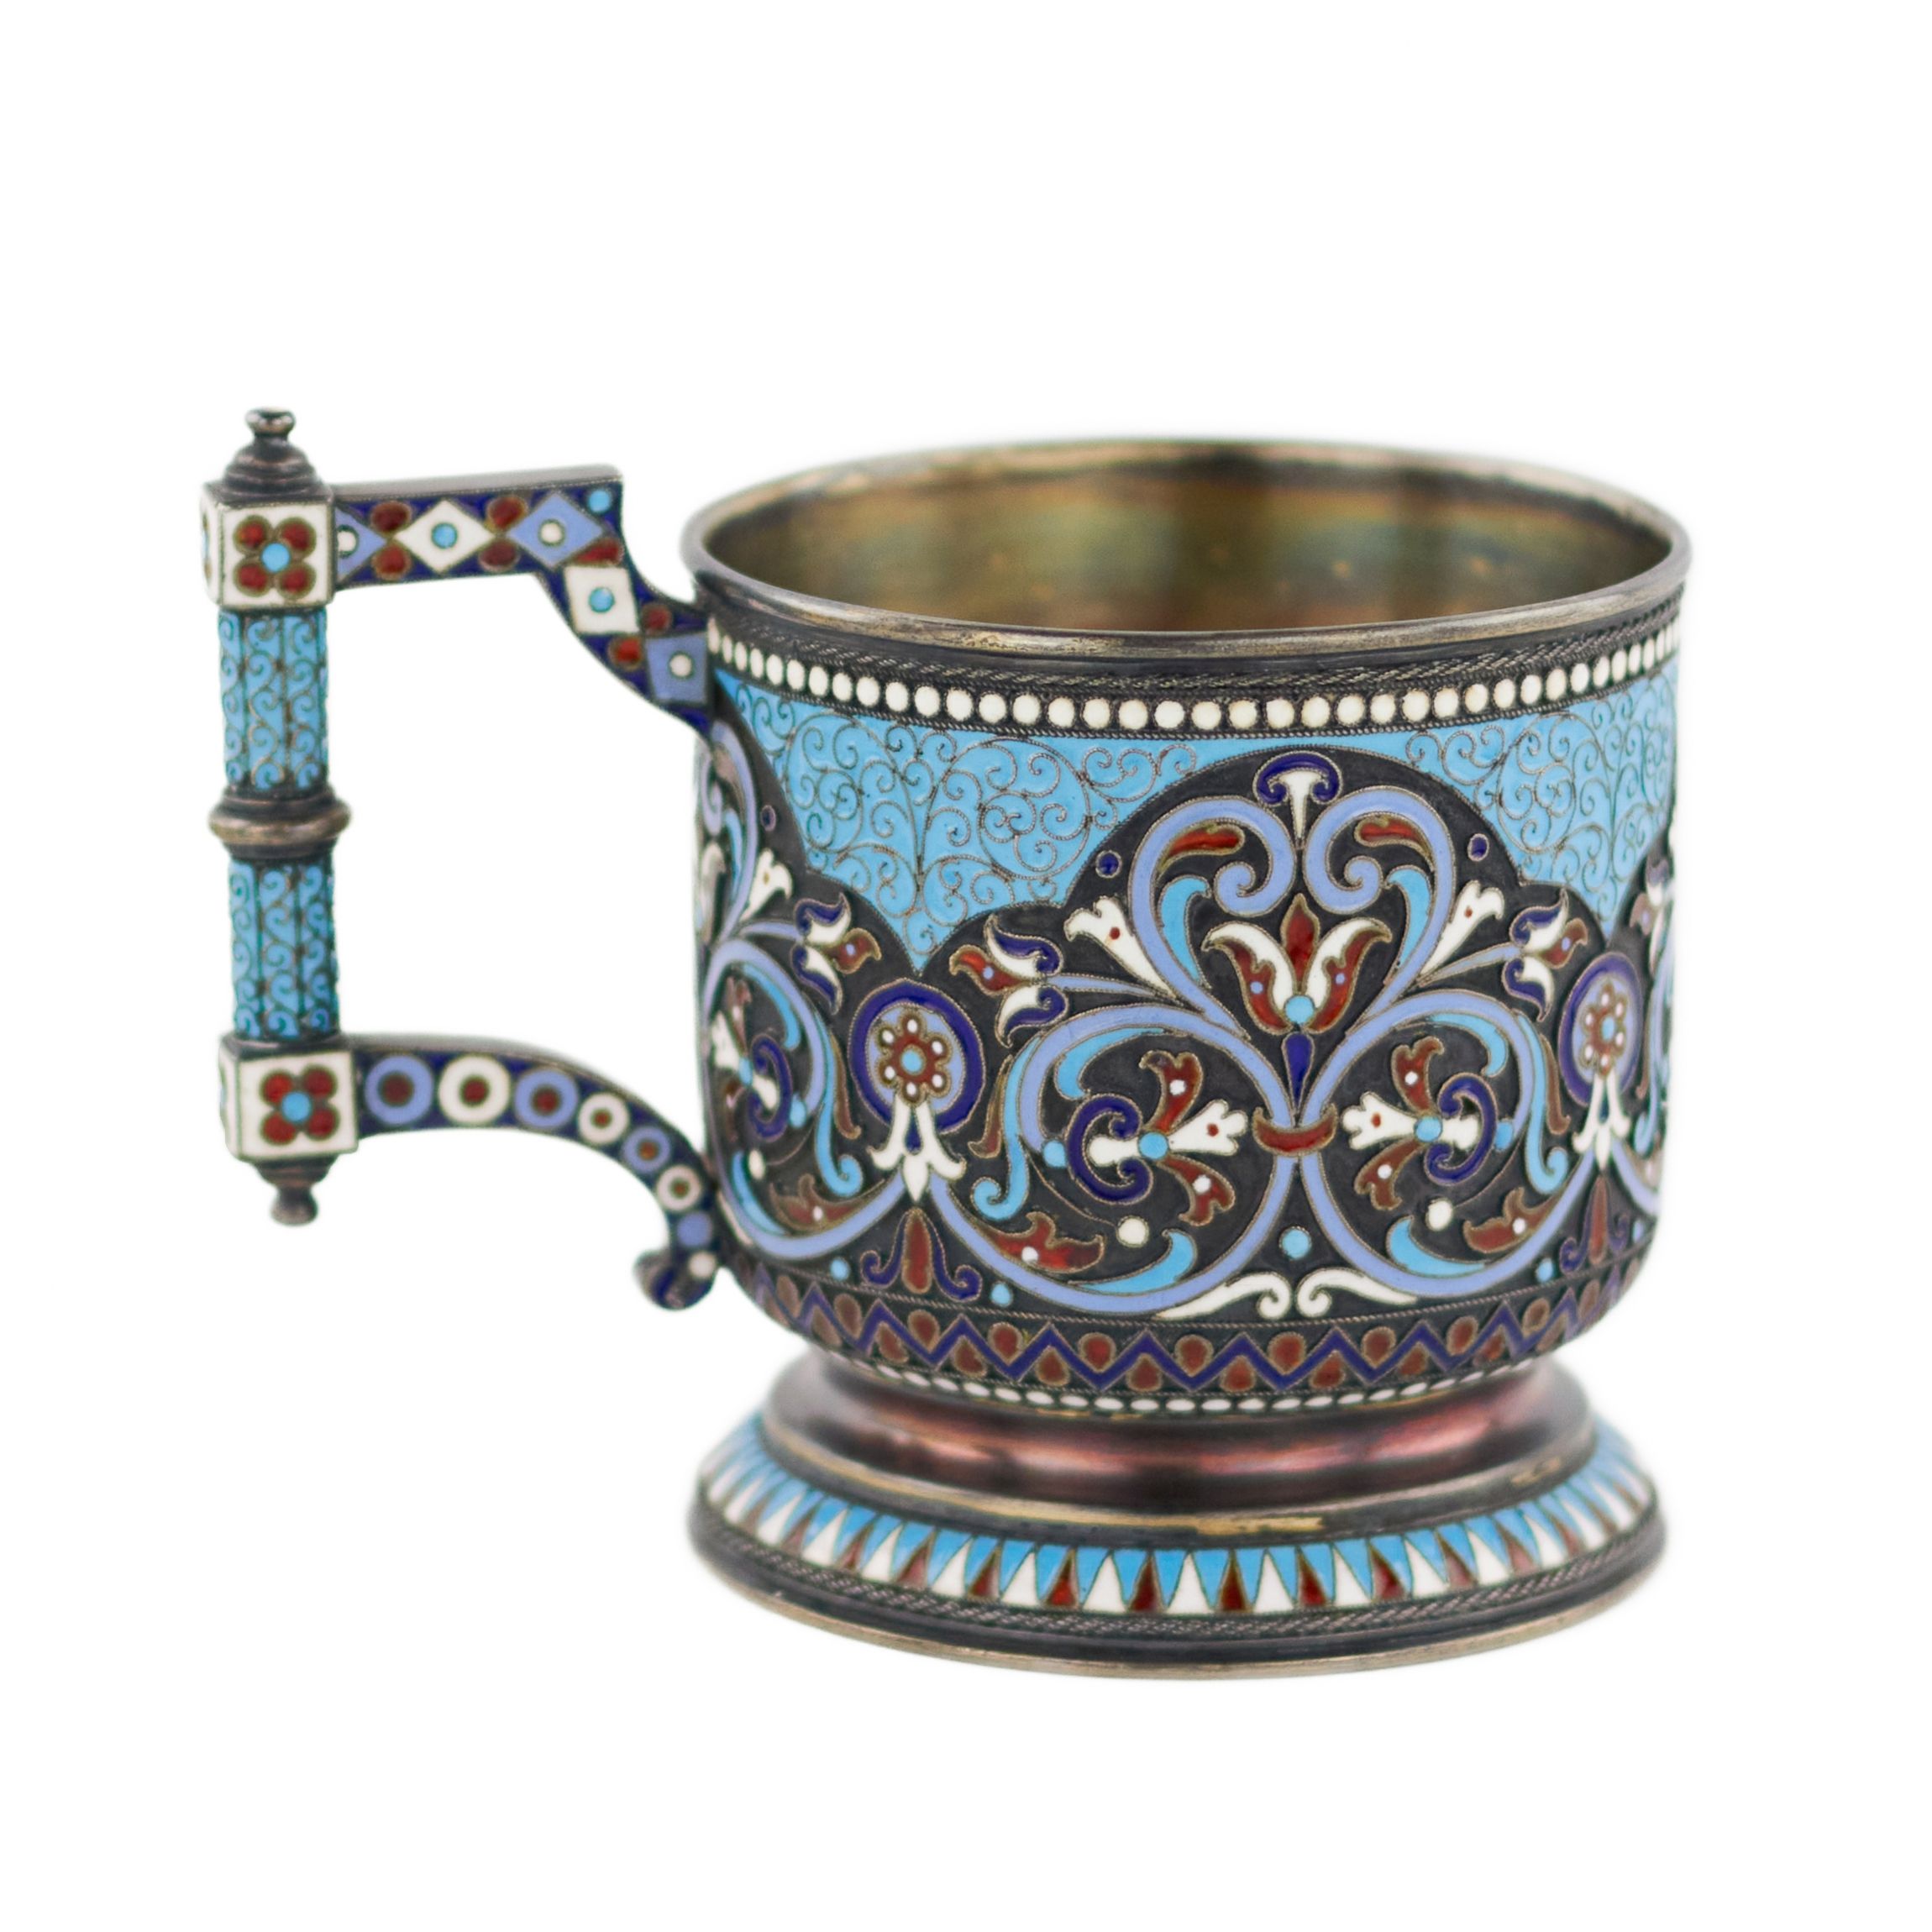 Nikolay ALEXEEV, silver cloisonne enamel glass holder in neo-Russian style. 1895 - Image 4 of 9